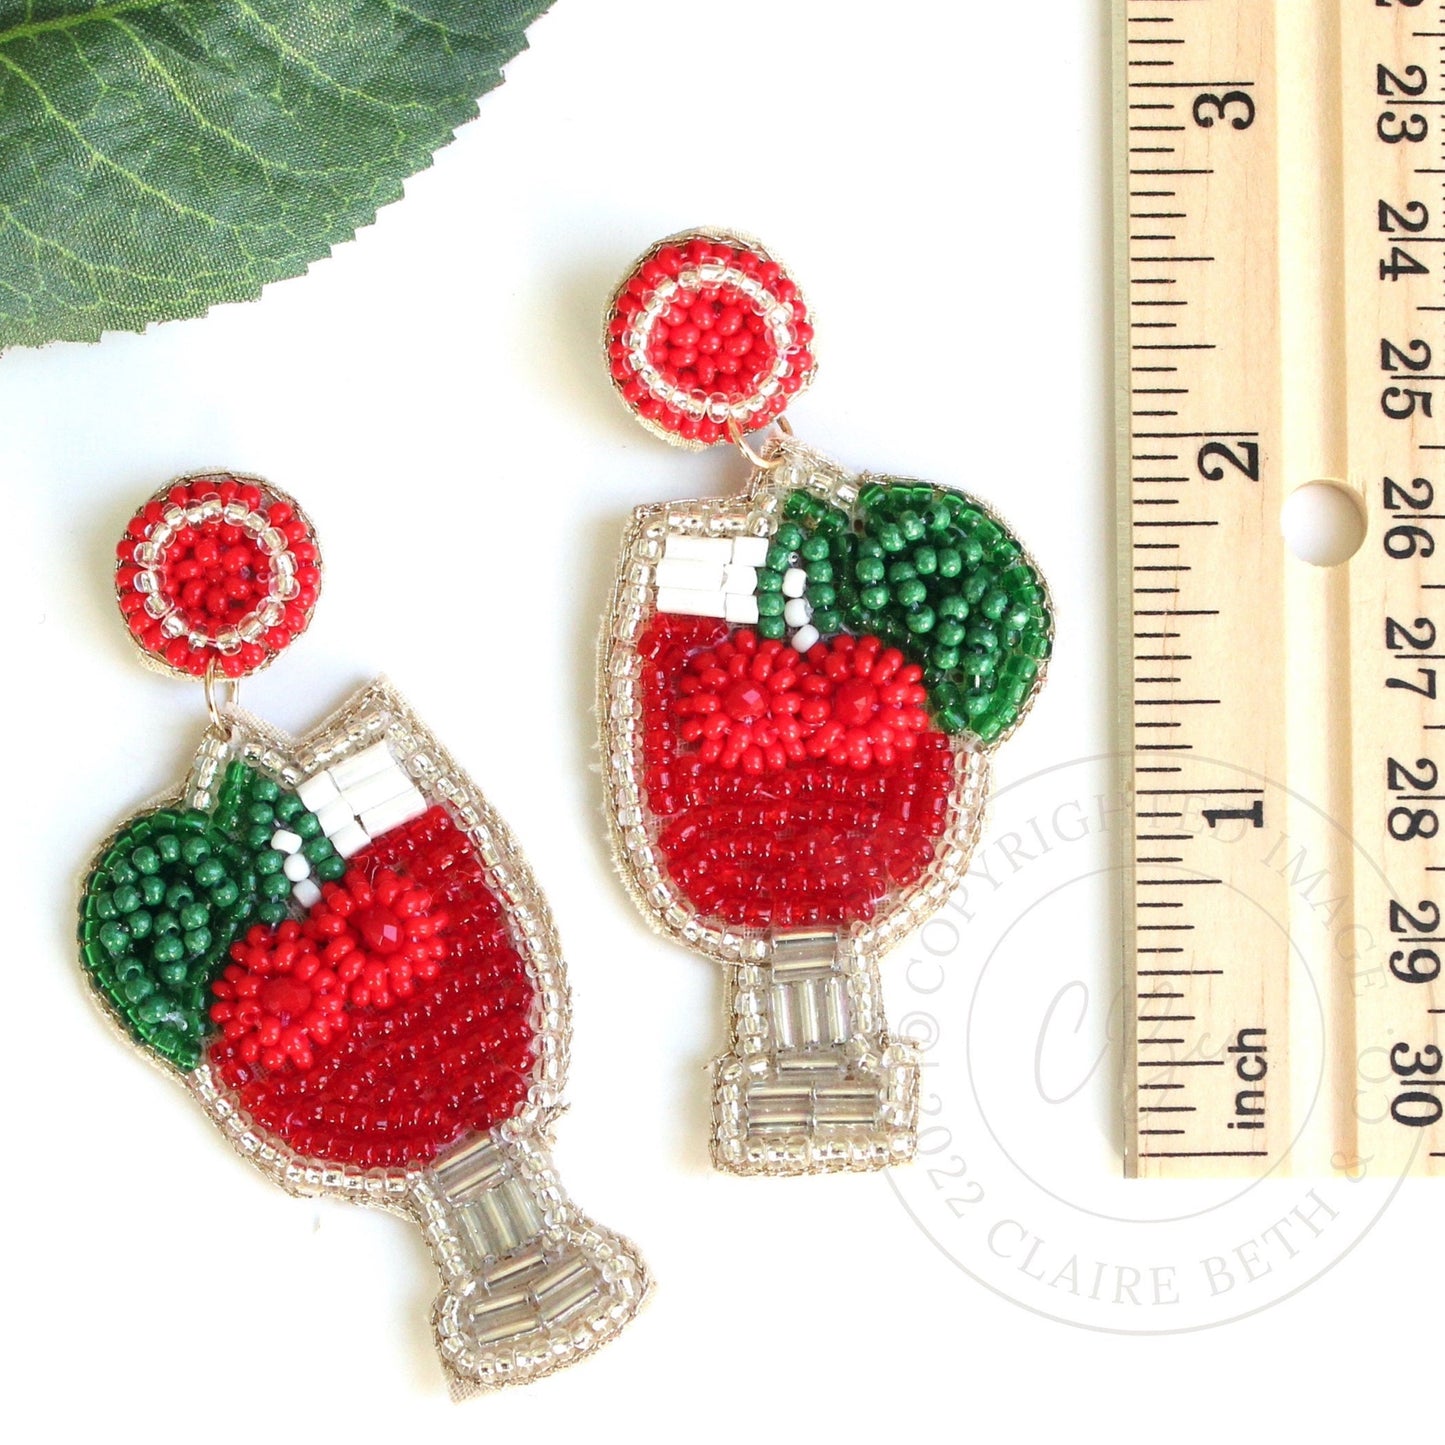 cherry drink beaded earrings next to ruler showing 2.75 inches length